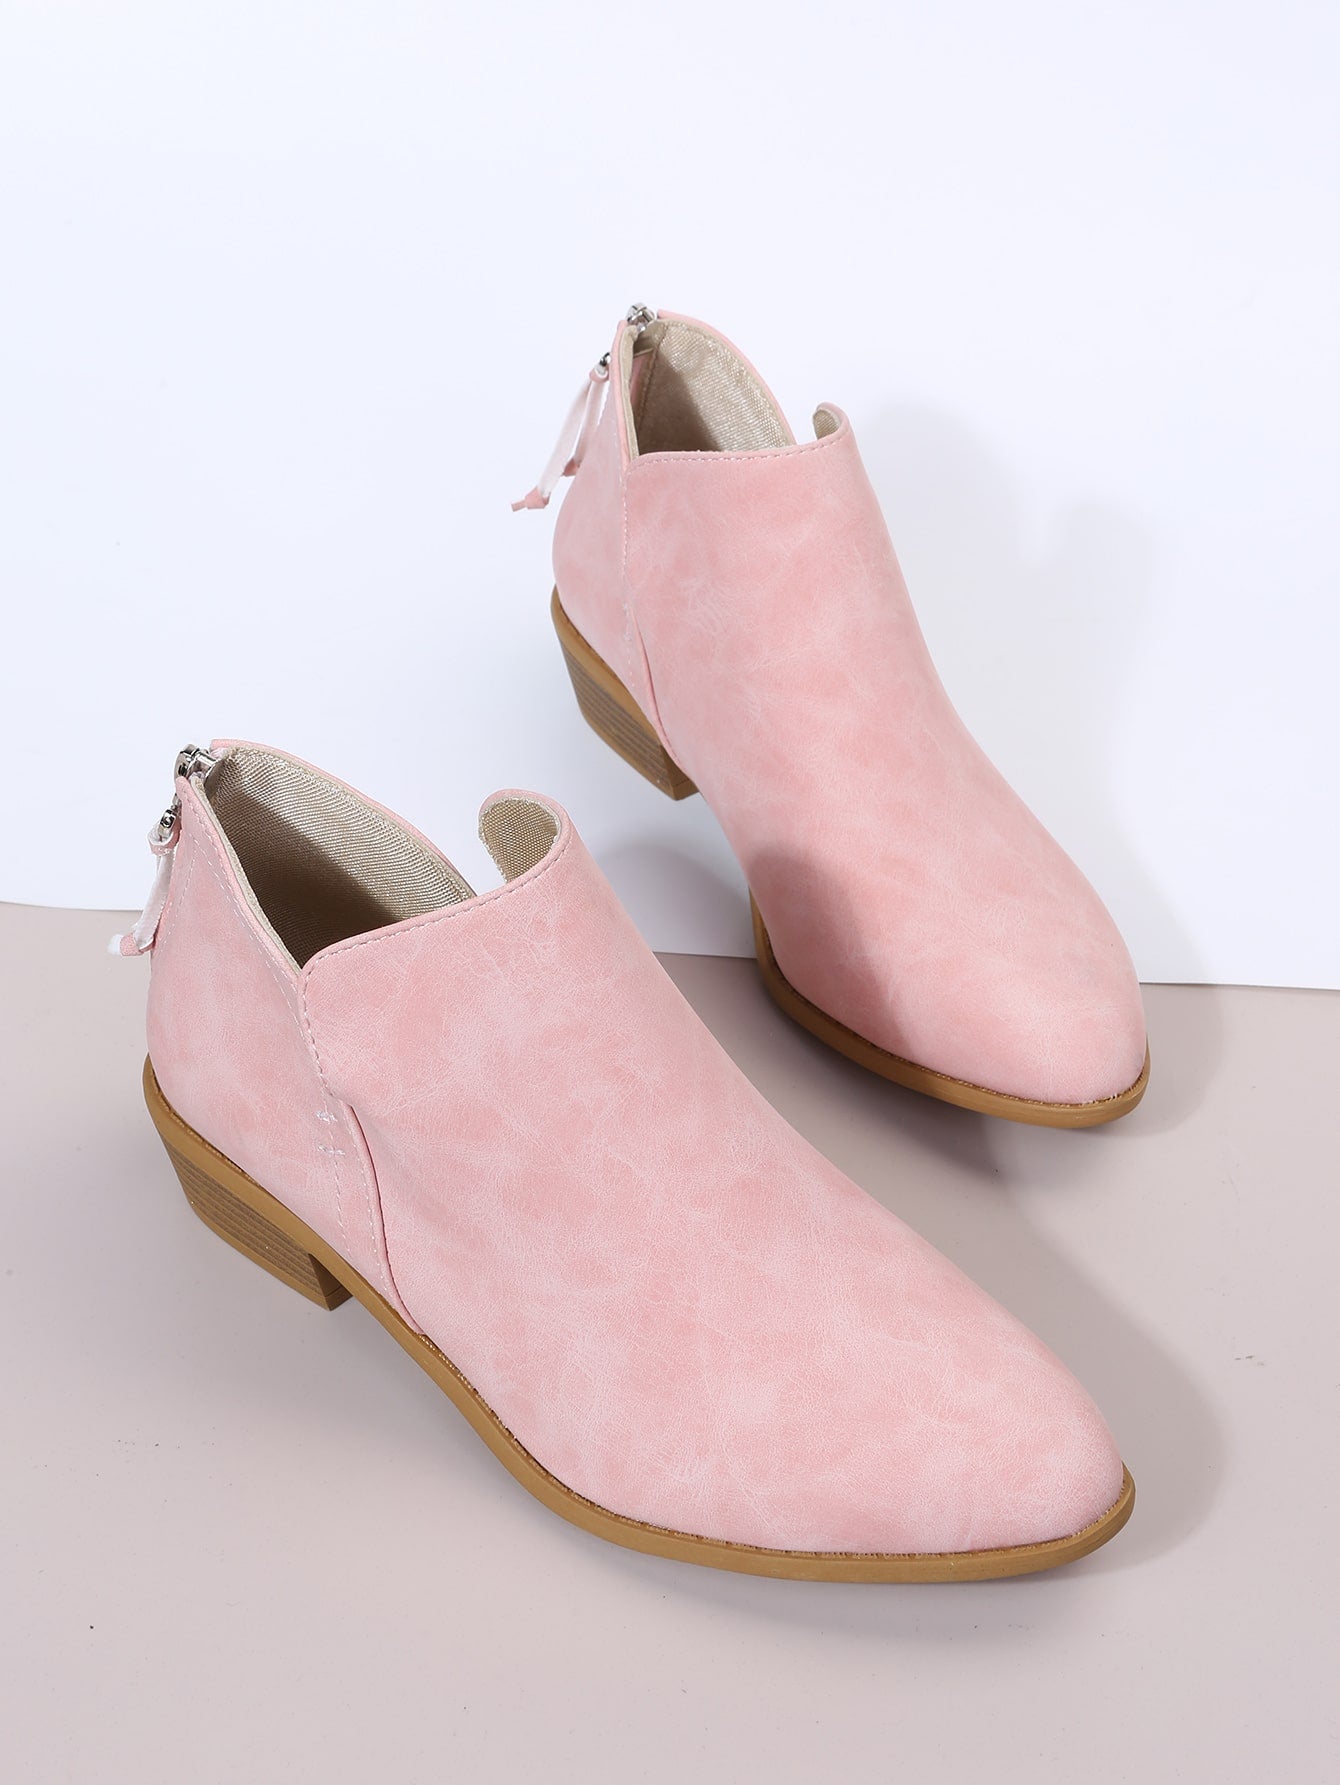 Solid Pink Color American Style Short Boots, Minimalist Design With Back Zipper